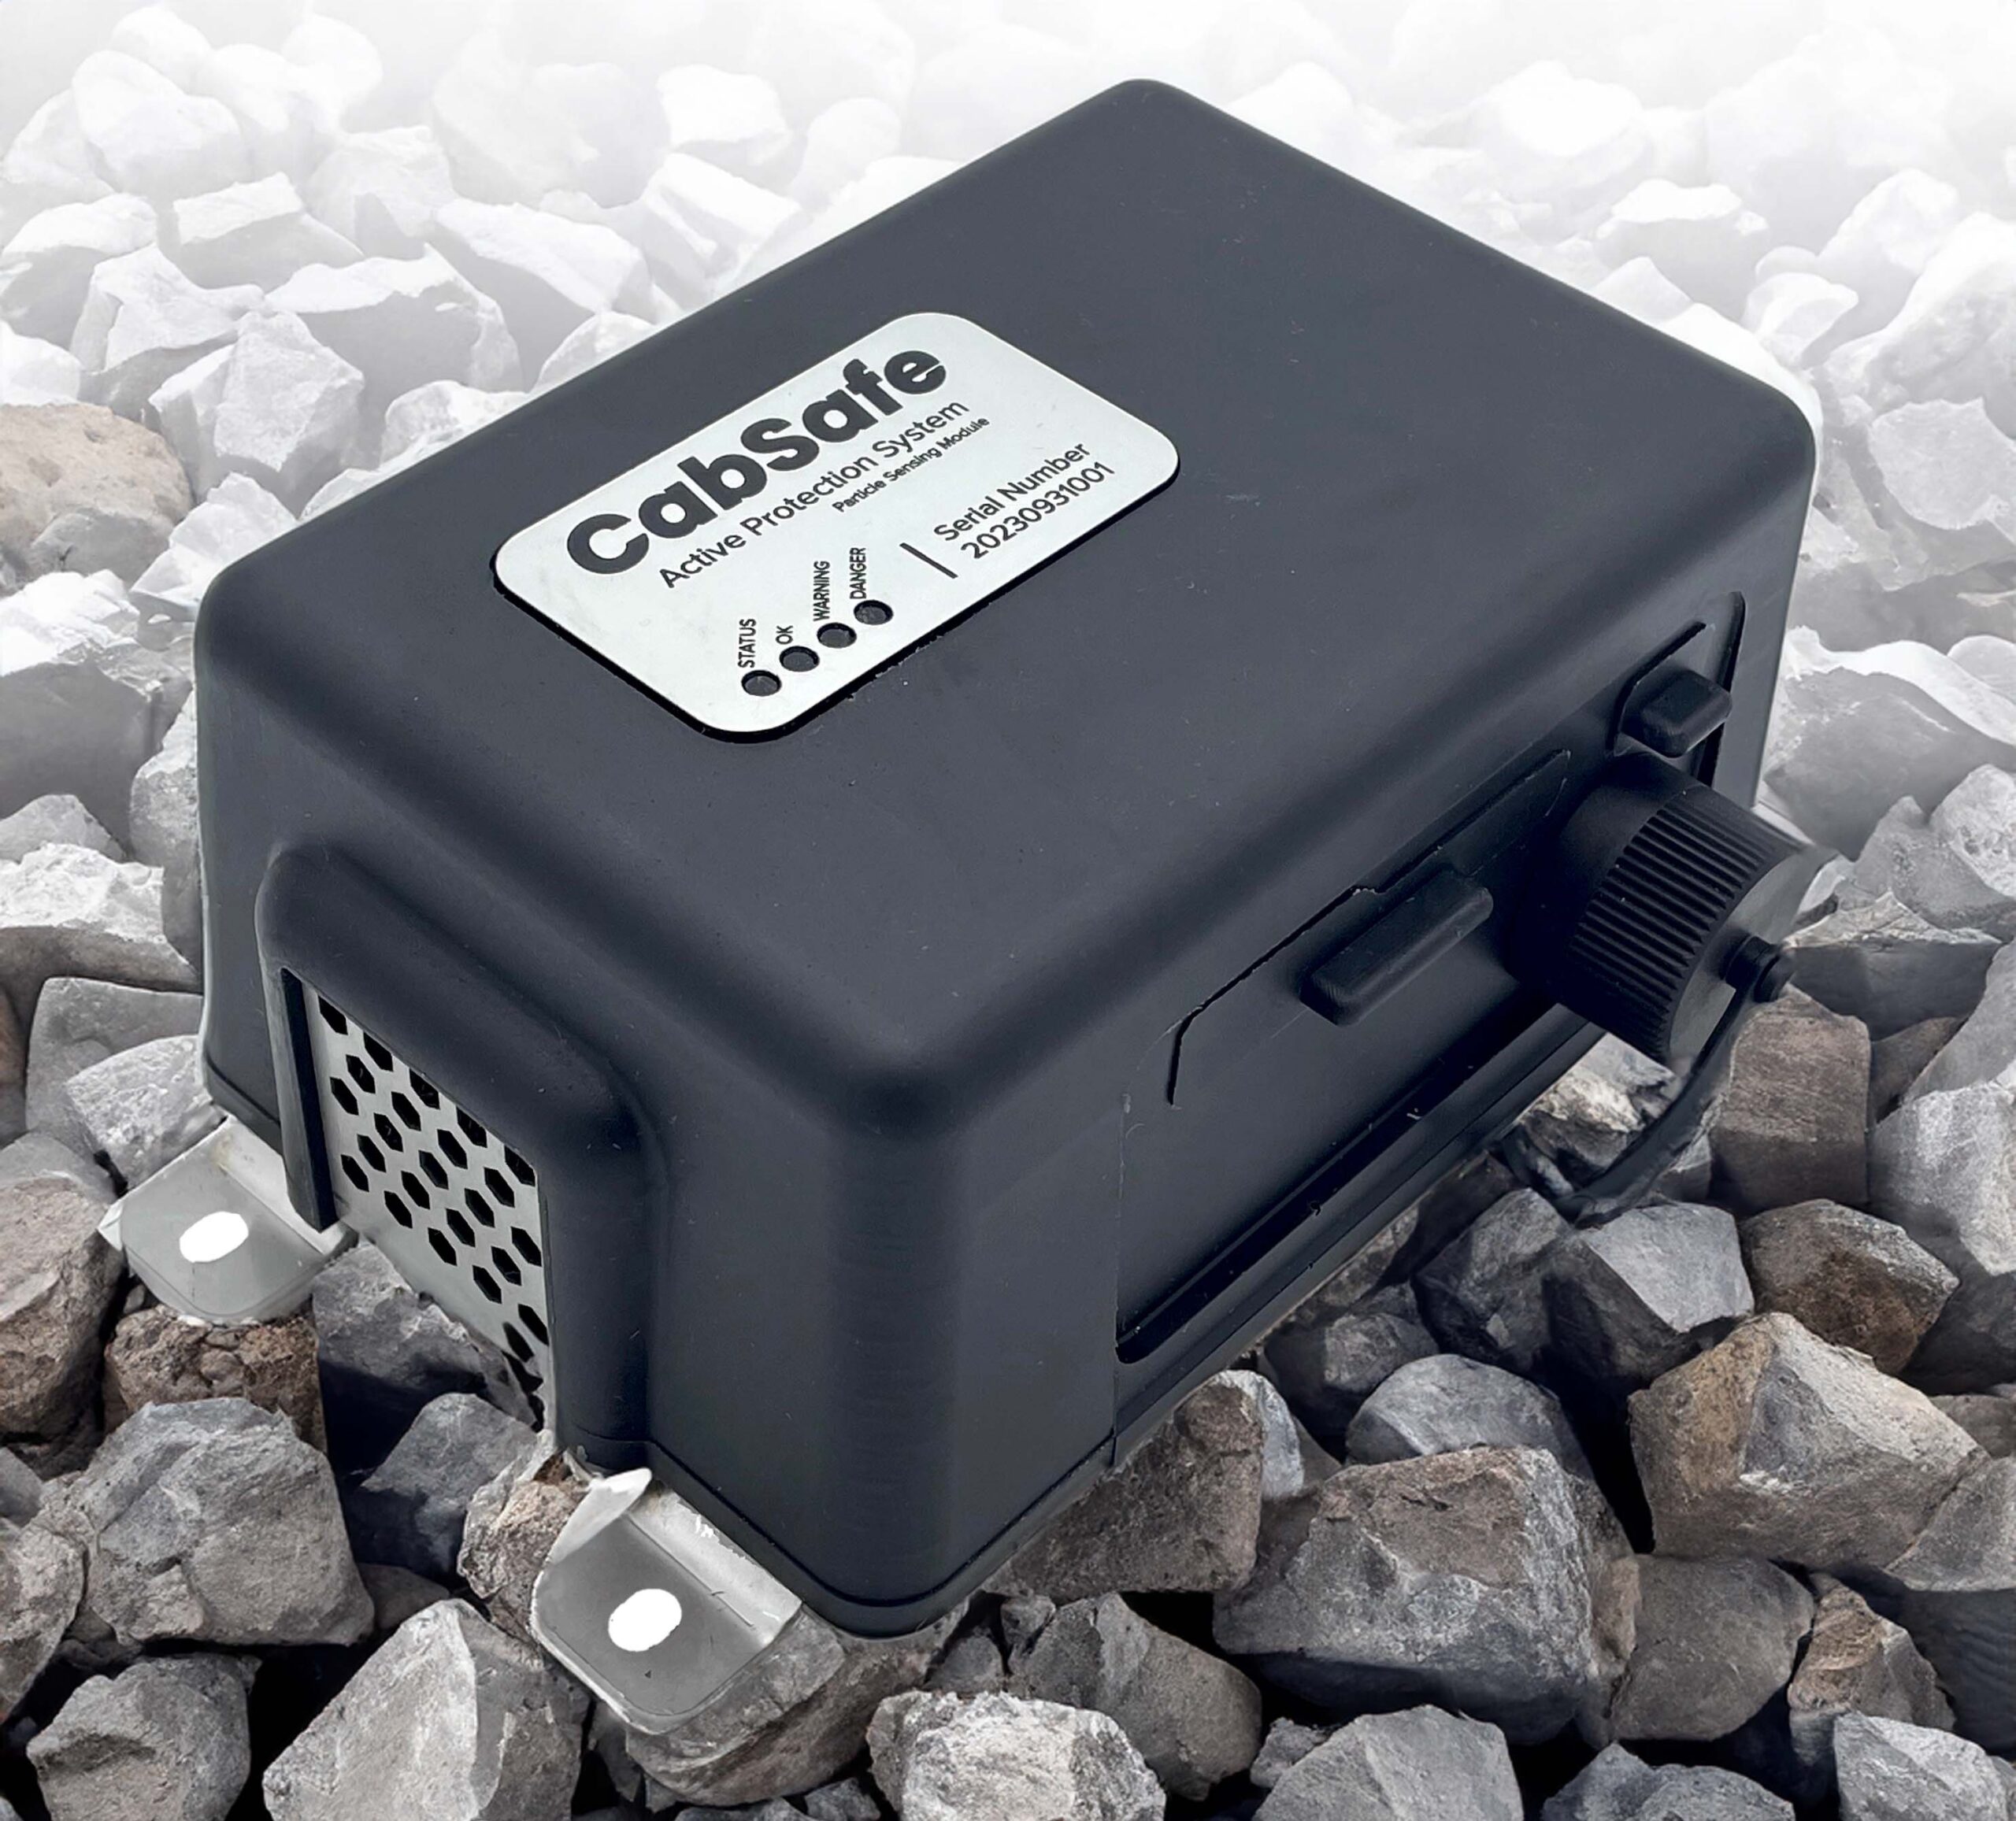 CabSafe with Rugged enclosure